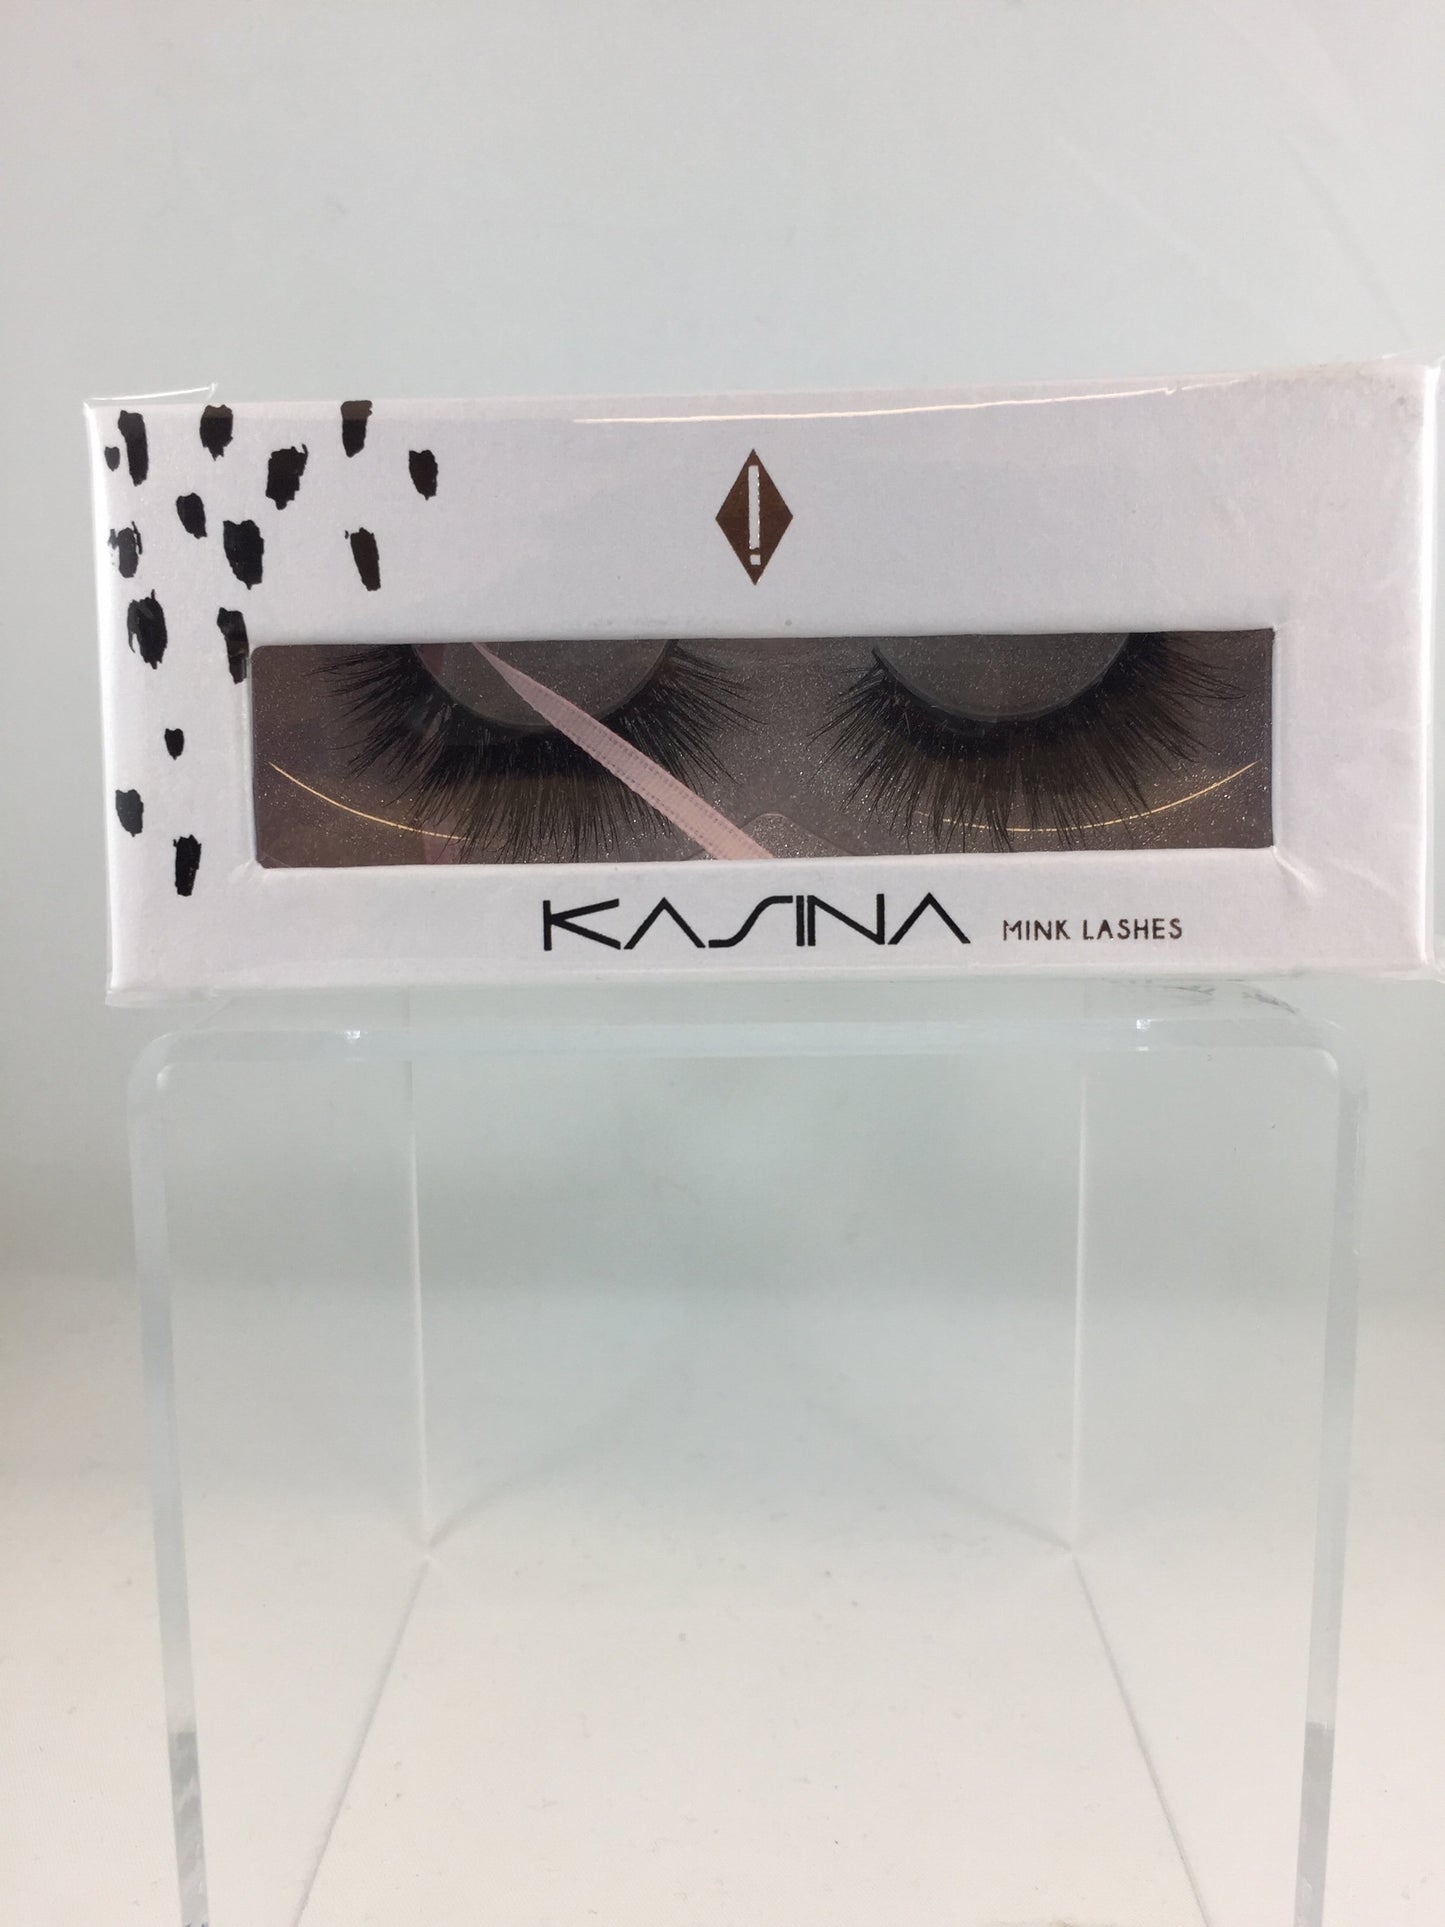 100% mink lashes will embrace your eyes natural beauty while adding length and volume. And with their easy application, you will enjoy wearing them again and again.